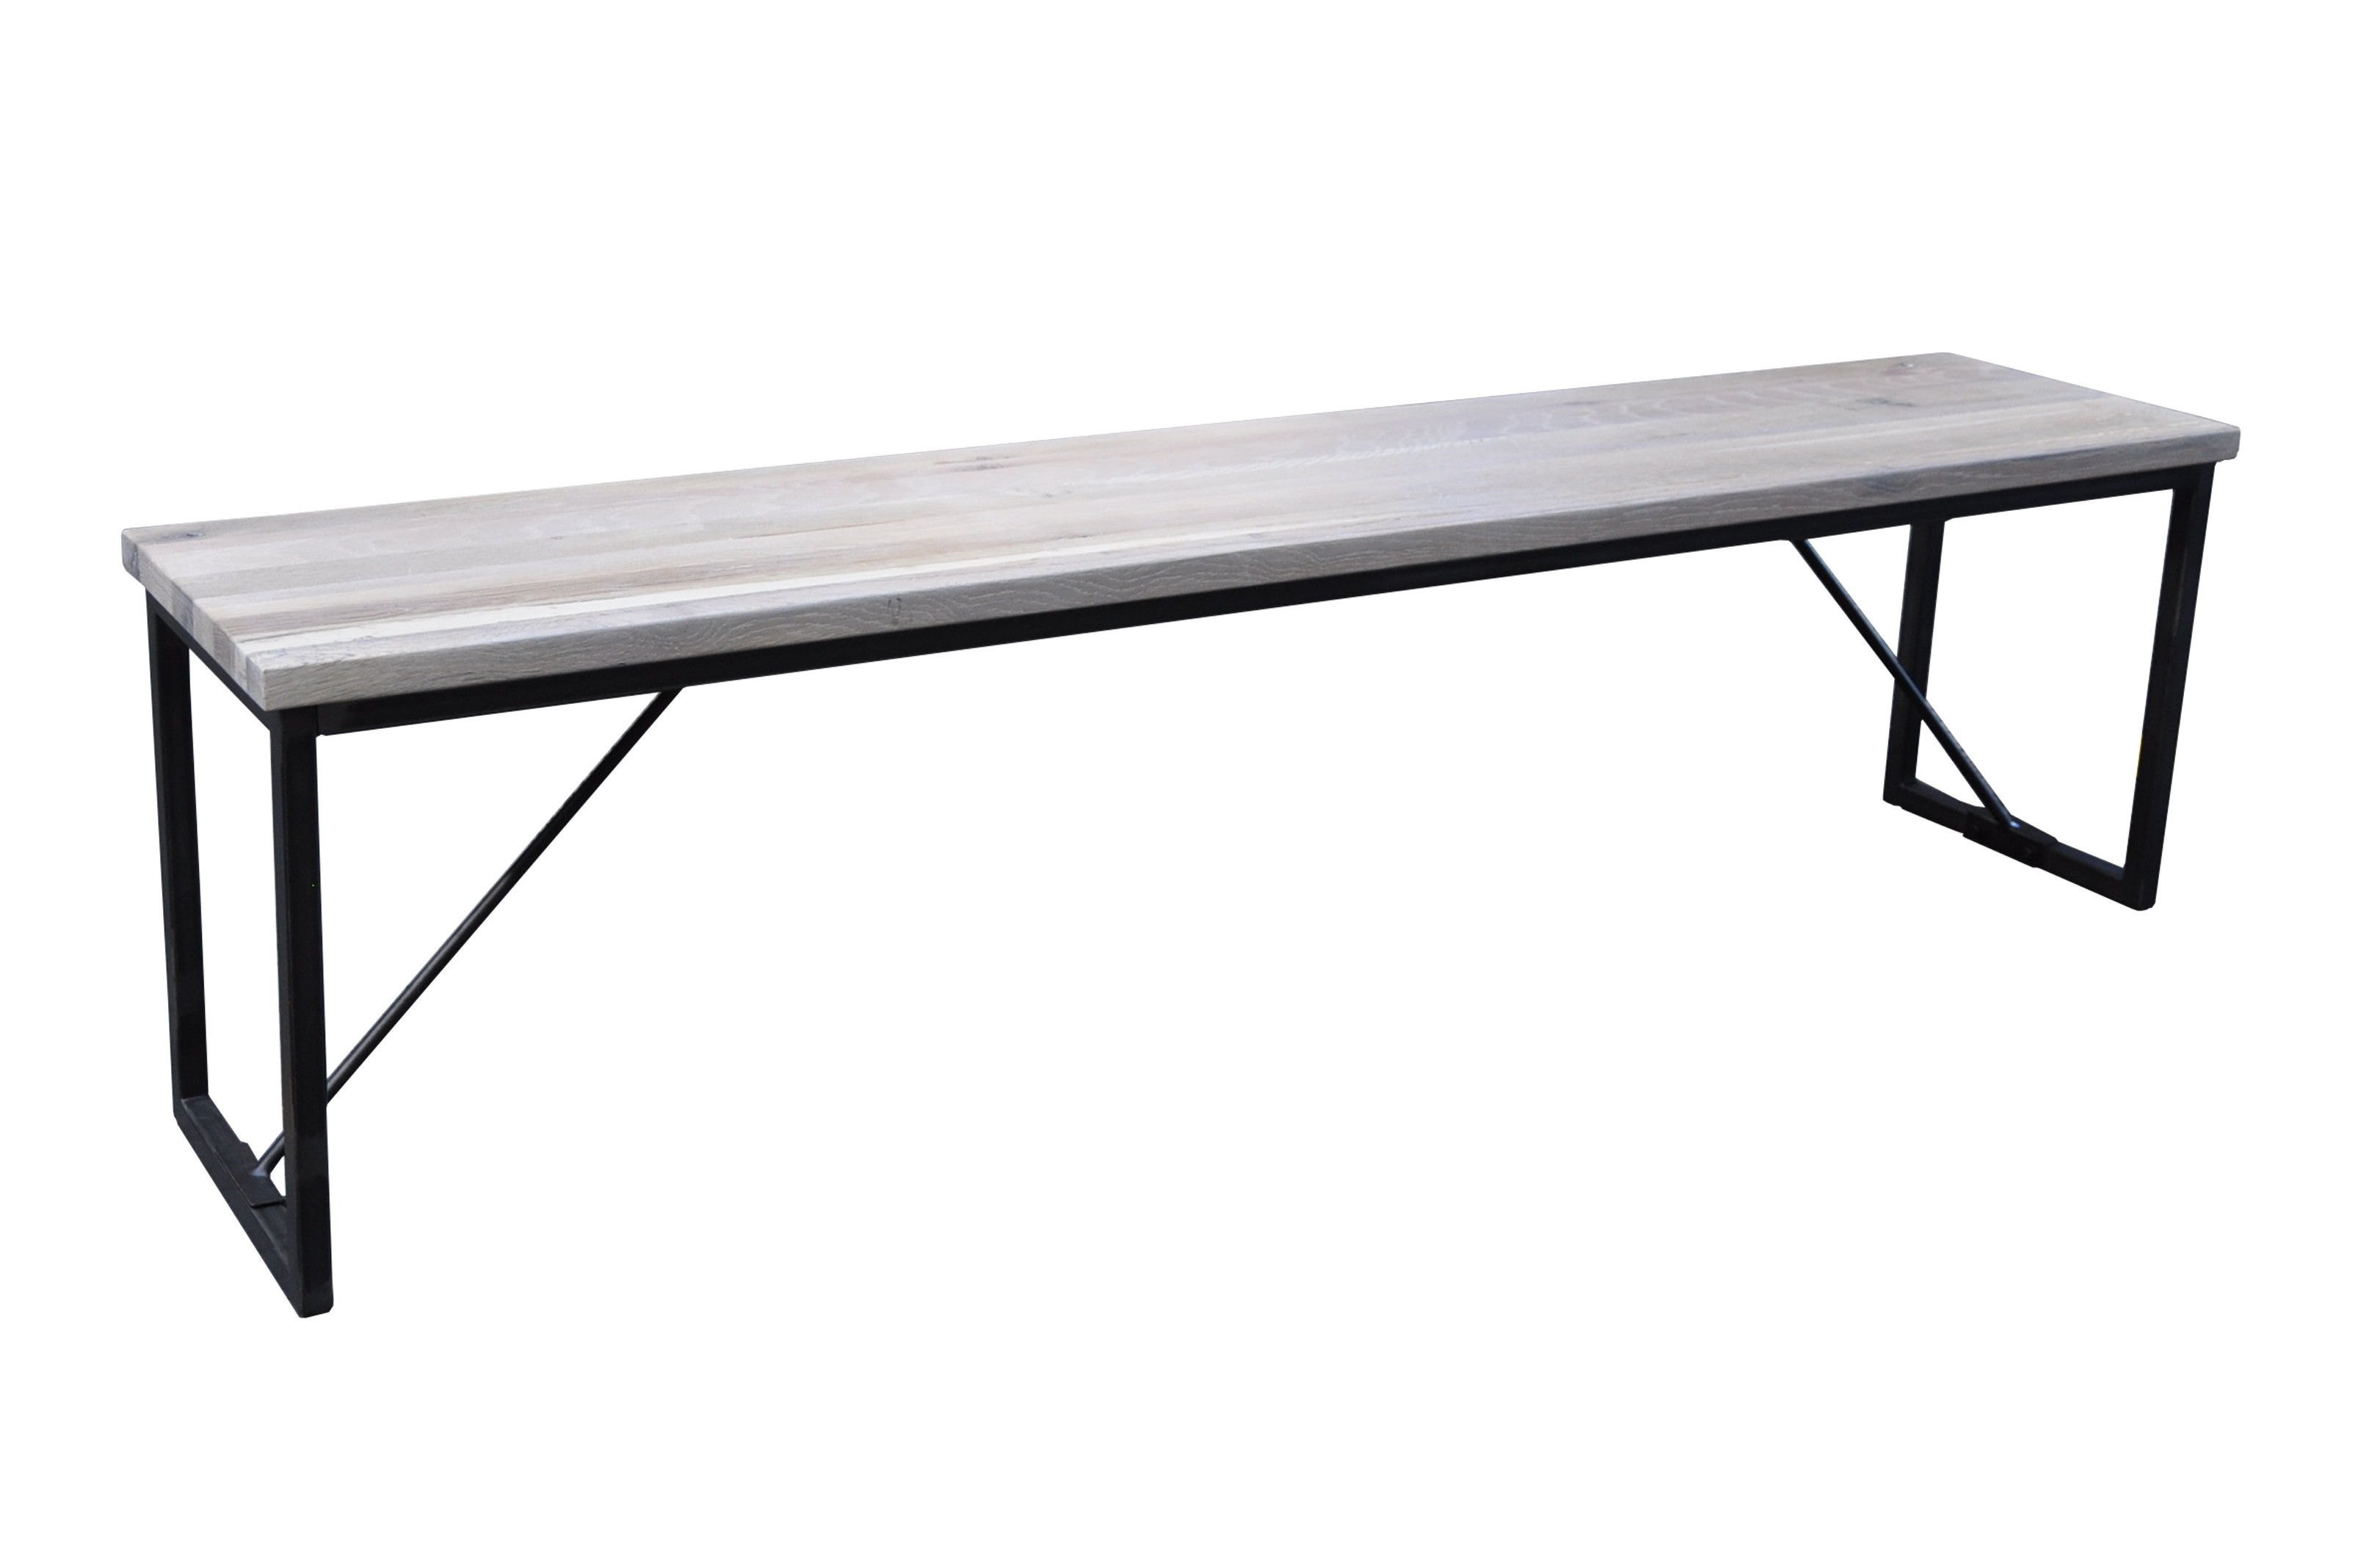 Rent a Dining table bench white? Rent at KeyPro furniture rental!